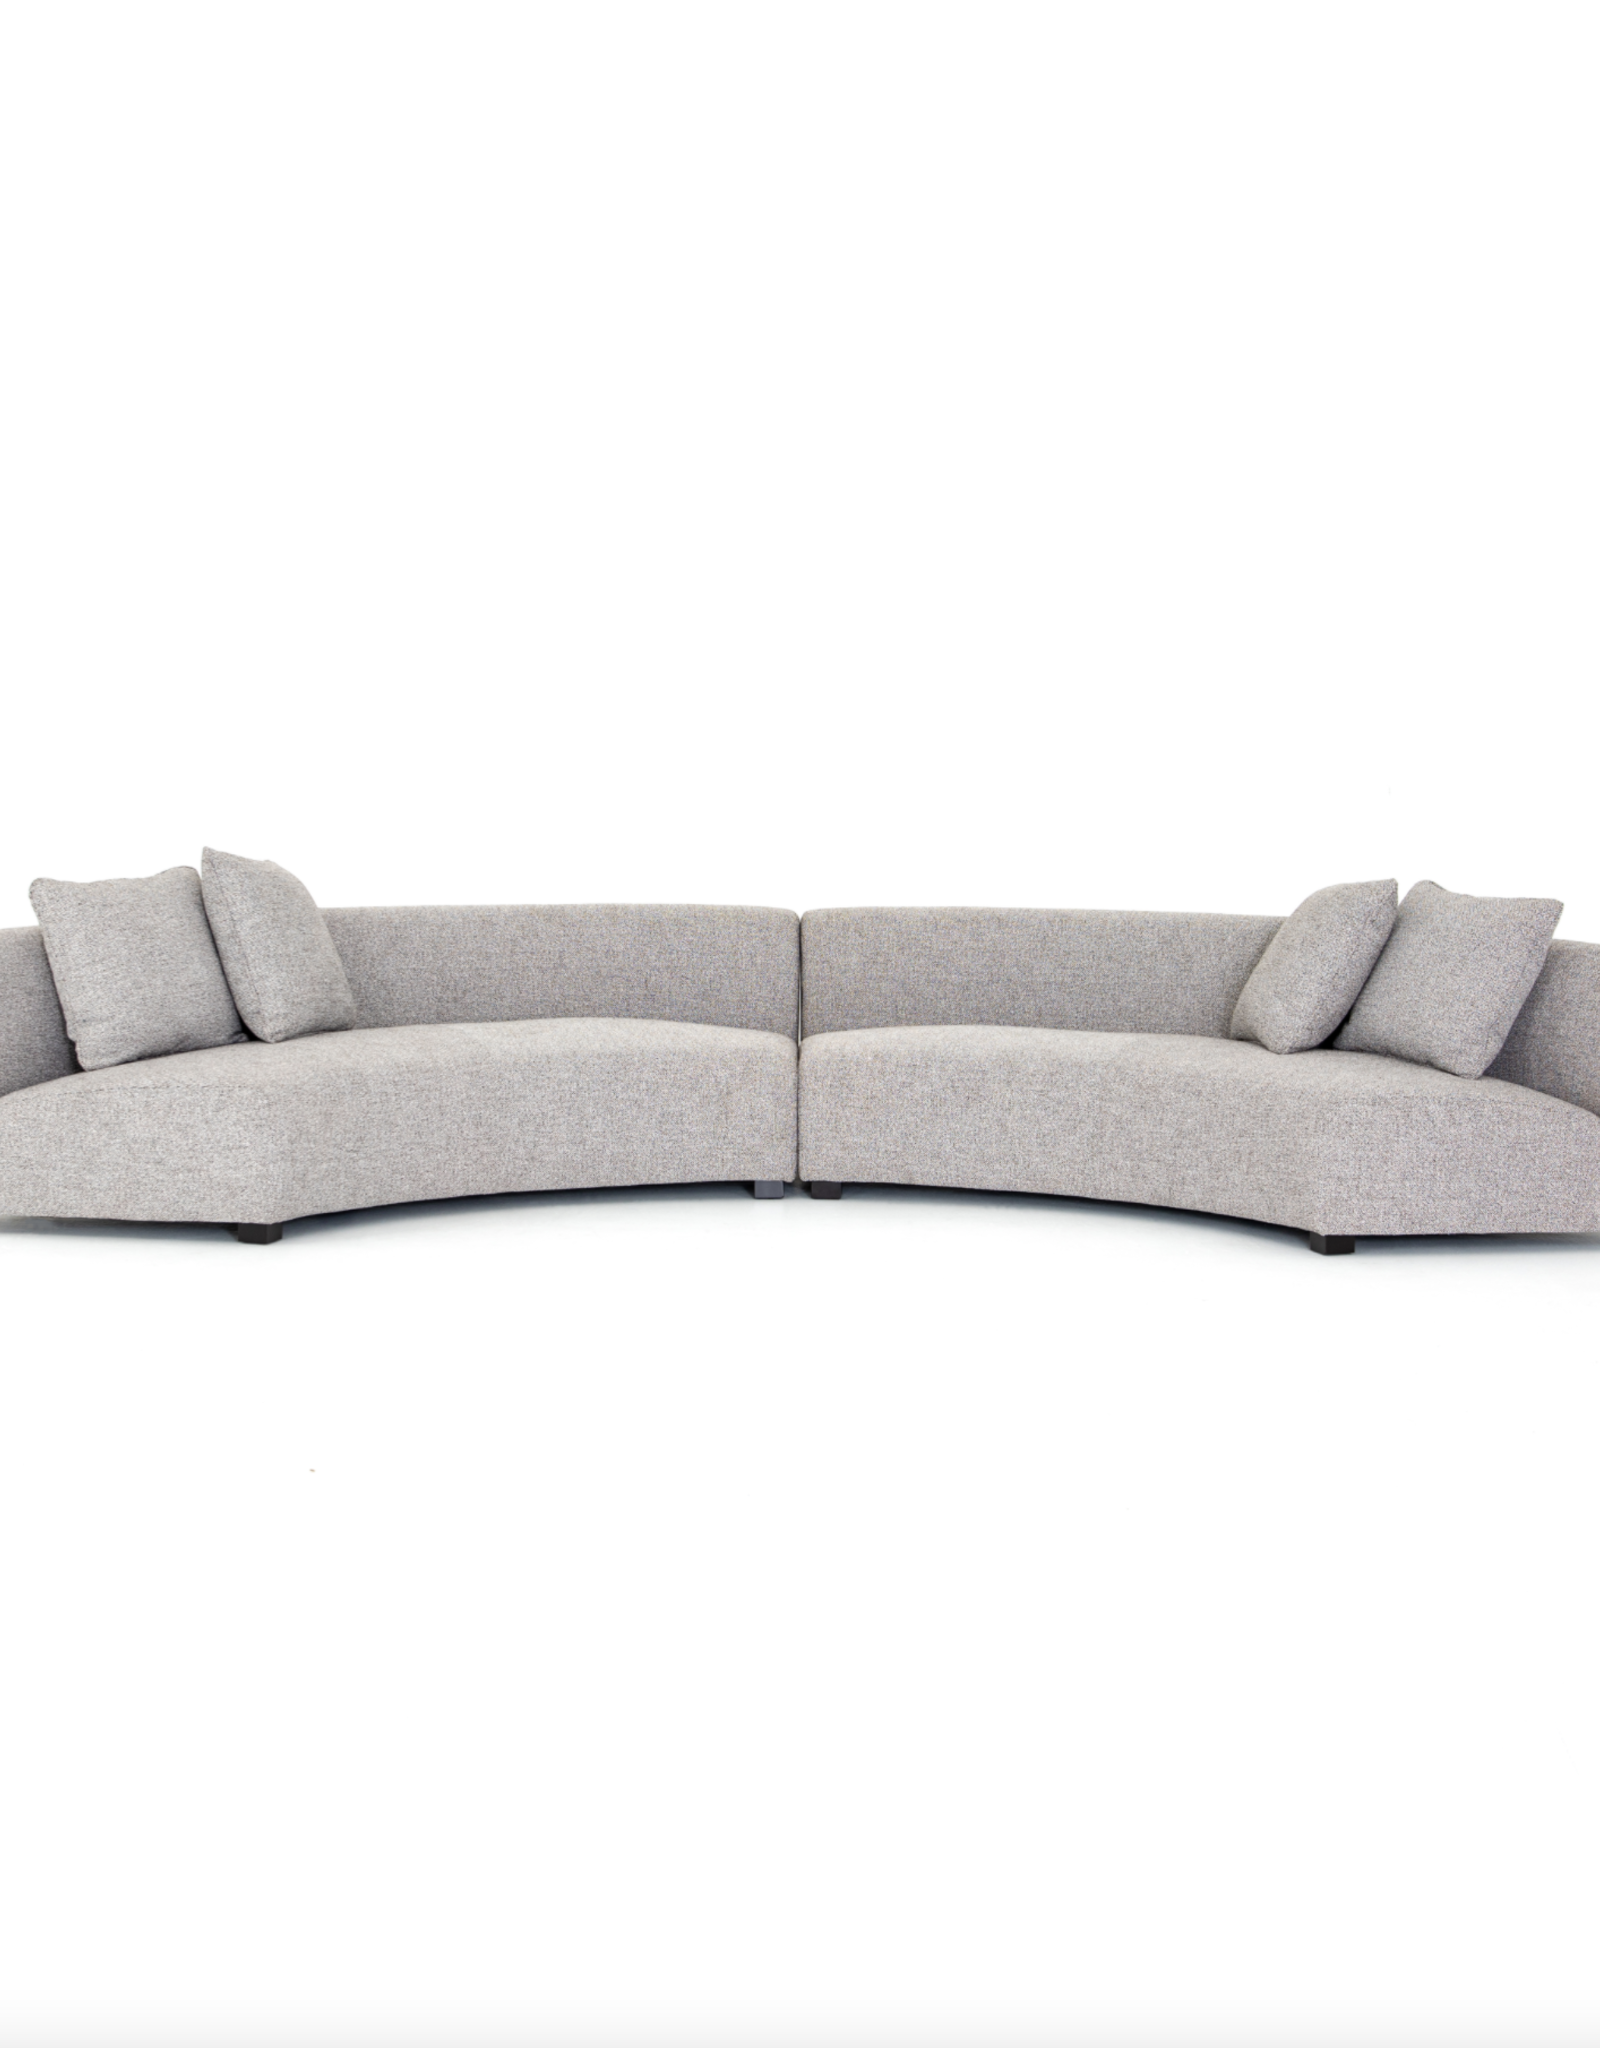 Liam 2 Piece Sectional in Astor Ink